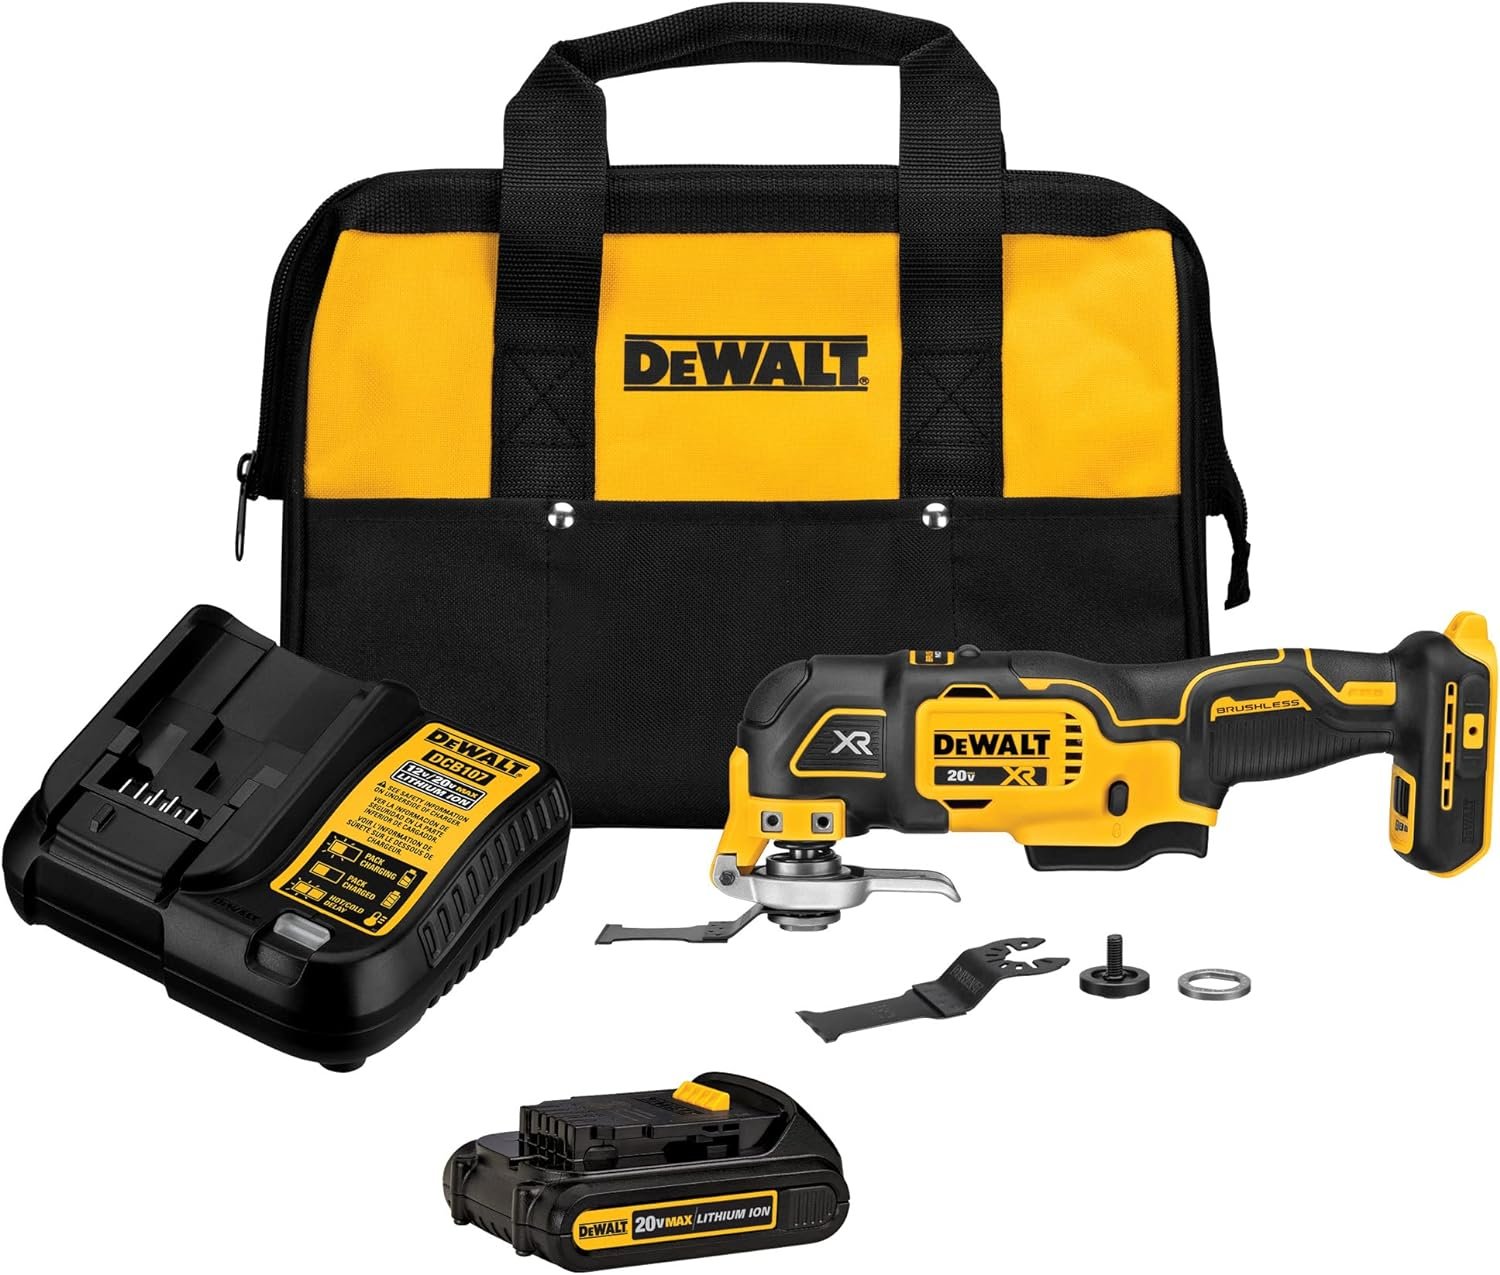 Prime Day Tool Deals 2023 (updated continually) — 731 Woodworks